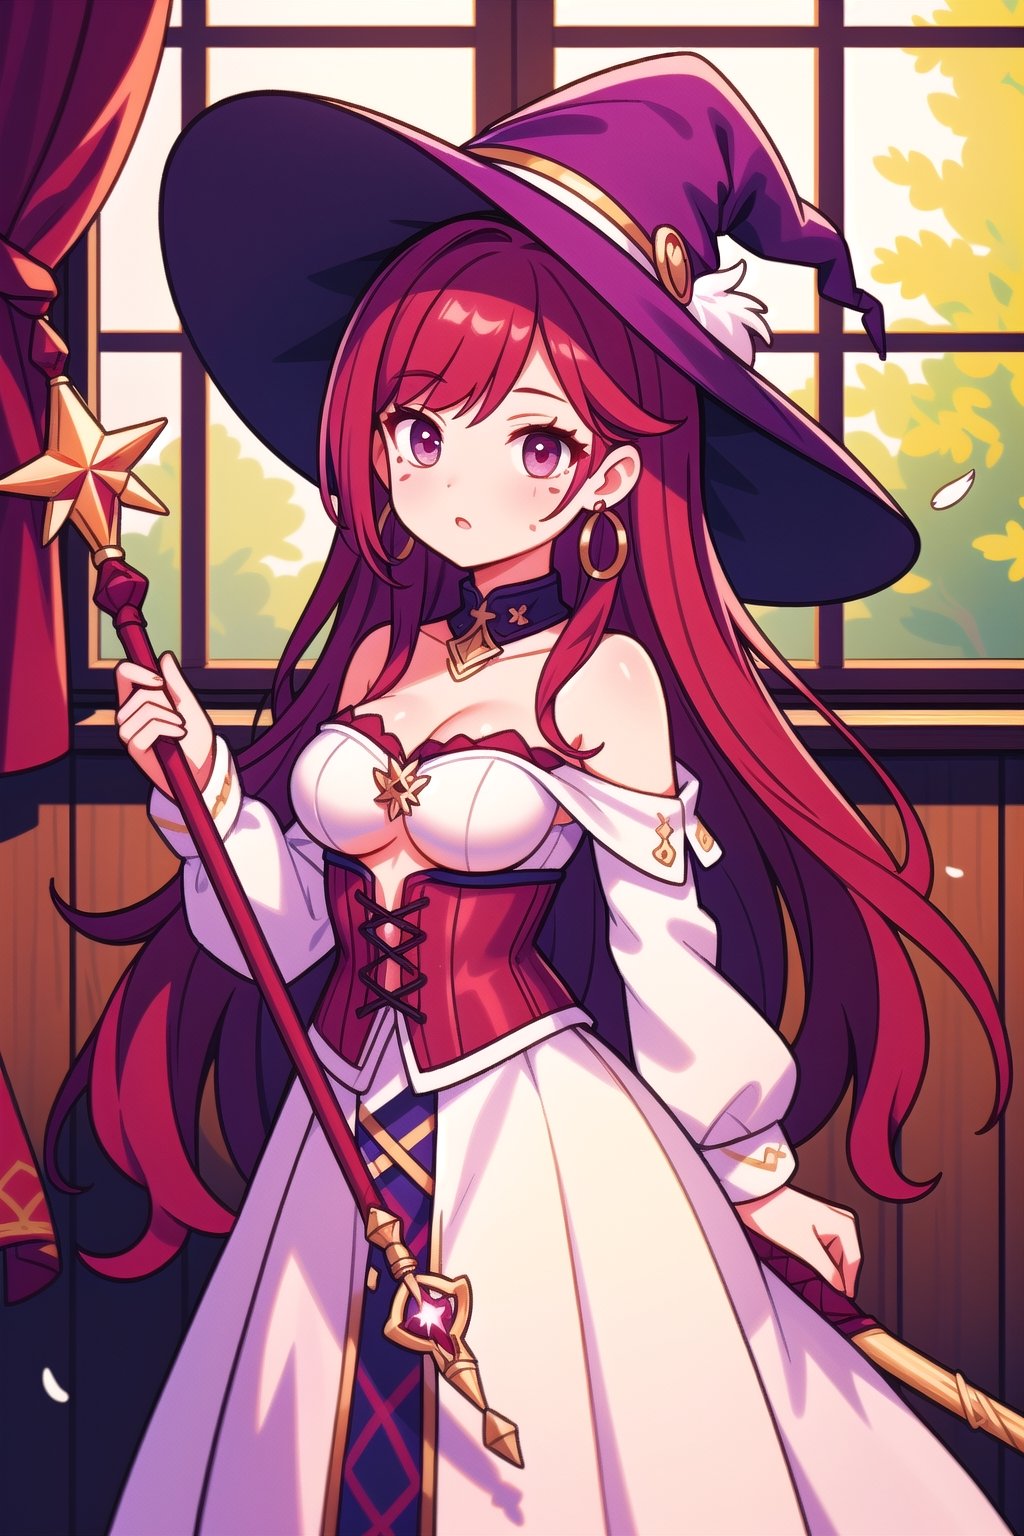 Mature female, long ginger hair, extremely long hair, beauty mark, burgundy eyes, earrings, medium breasts, boob window, exposed shoulders 

Burgundy Witches hat, white feather on hat, long white dress, burgundy top, burgundy corset, white collar, gold arm brazers, magic staff